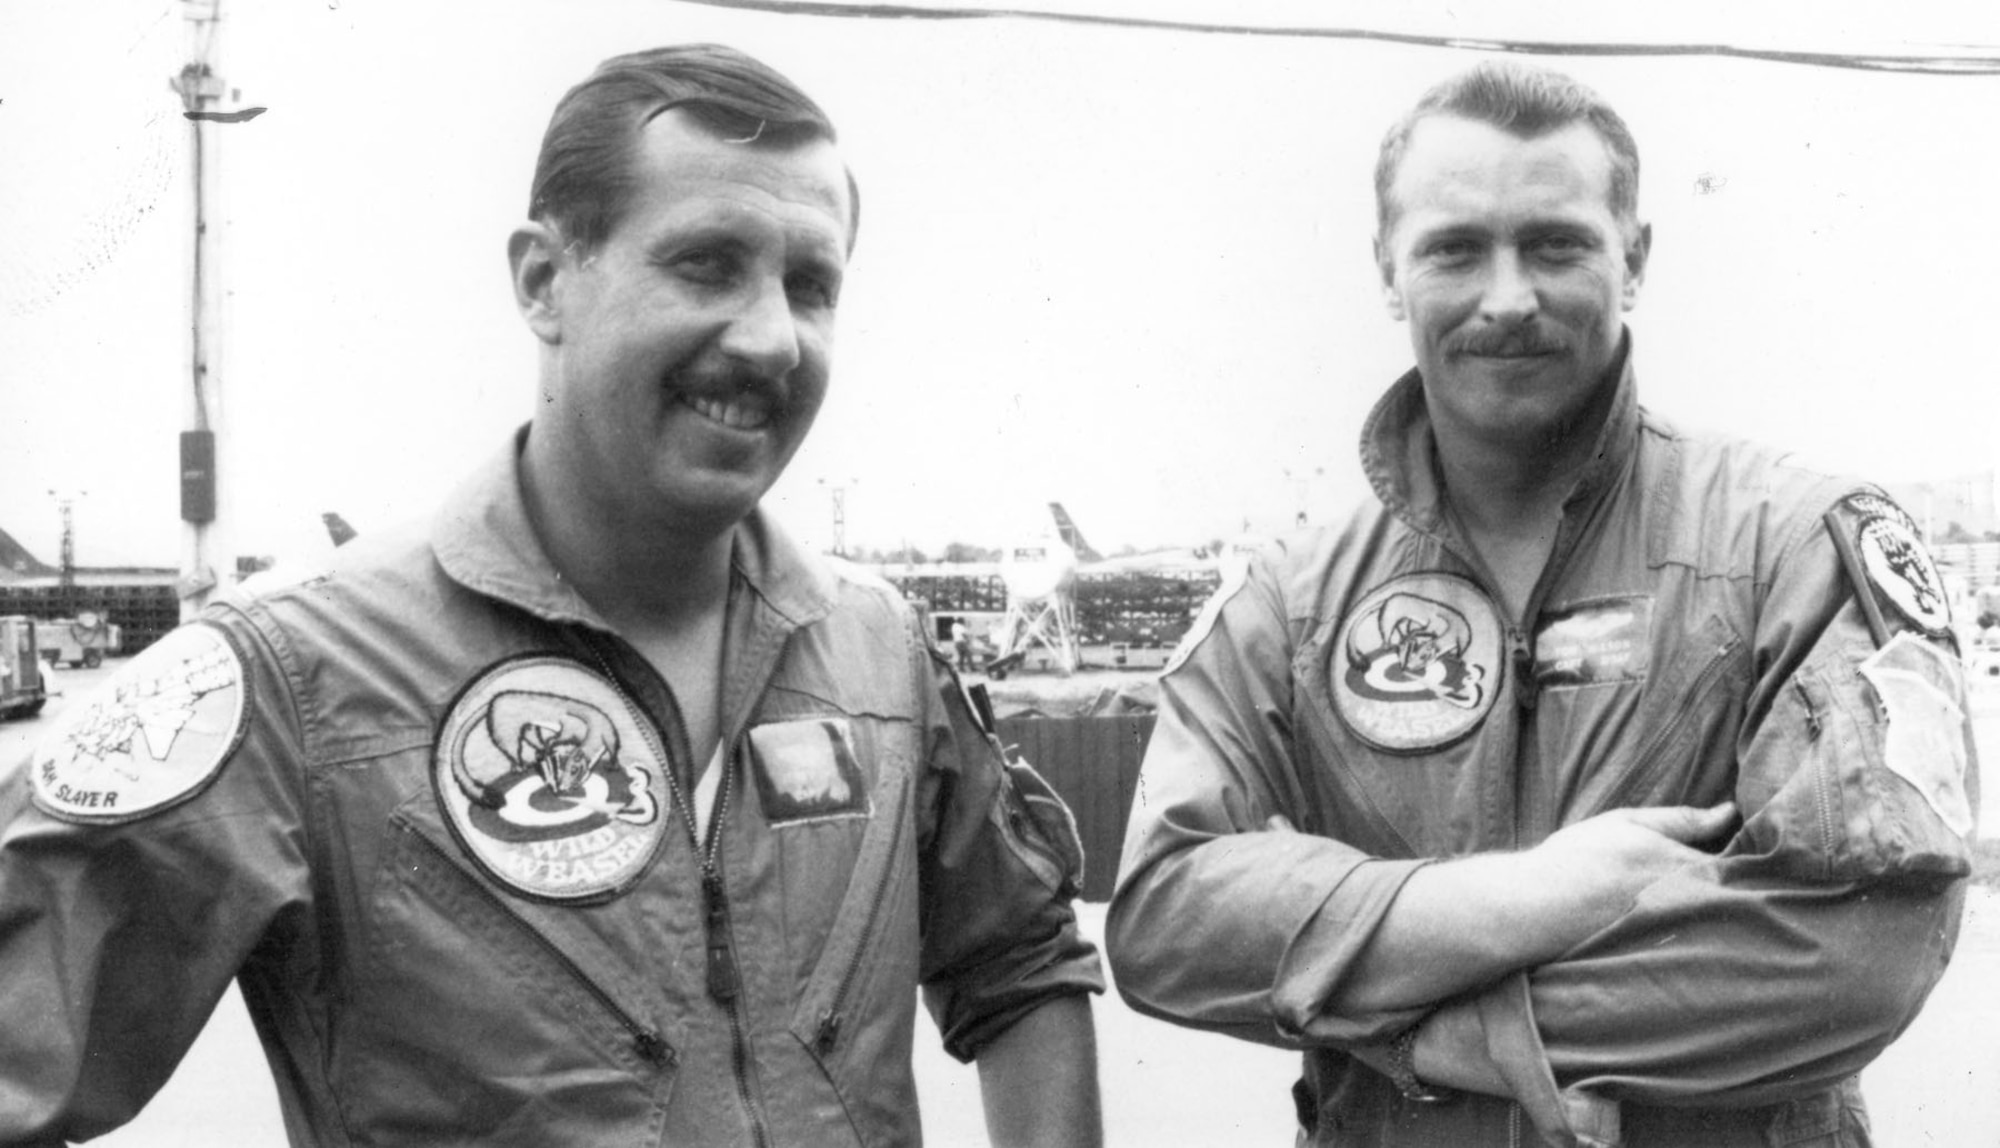 On April 23, 1967, Capt. Jerry Hoblit (l), pilot, and Capt. Tom Wilson (r), EWO, flew No. 3 in a four aircraft Wild Weasel formation on a strike against the heavily-defended area around Thai Nguyen, North Vietnam. Dodging three SA-2s, Hoblit and Wilson bombed one SAM site and fired their Shrikes against another. When an SA-2 missile damaged the lead aircraft, Hoblit and Wilson kept the SAM crew’s attention by engaging it, dodging yet another SA-2. Hoblit and Wilson then remained behind to cover the crew of an RF-4C that had been shot down before the strike.  None of the strike aircraft were lost. For their valor and daring, Capt. Hoblit was awarded the Air Force Cross, and Capt. Wilson was awarded the Silver Star. (U.S. Air Force photo)